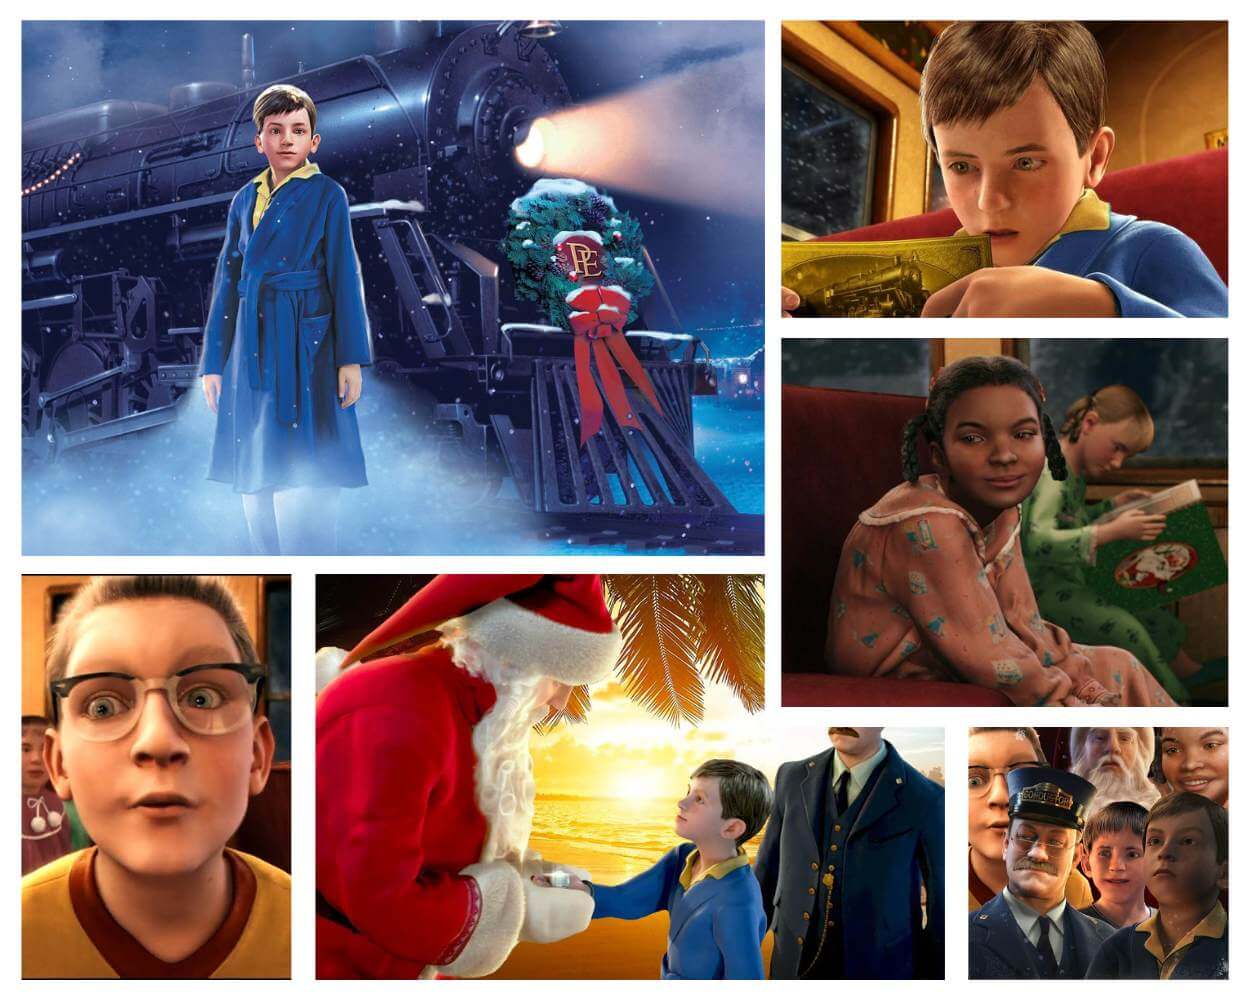 Polar Express Characters with Casting